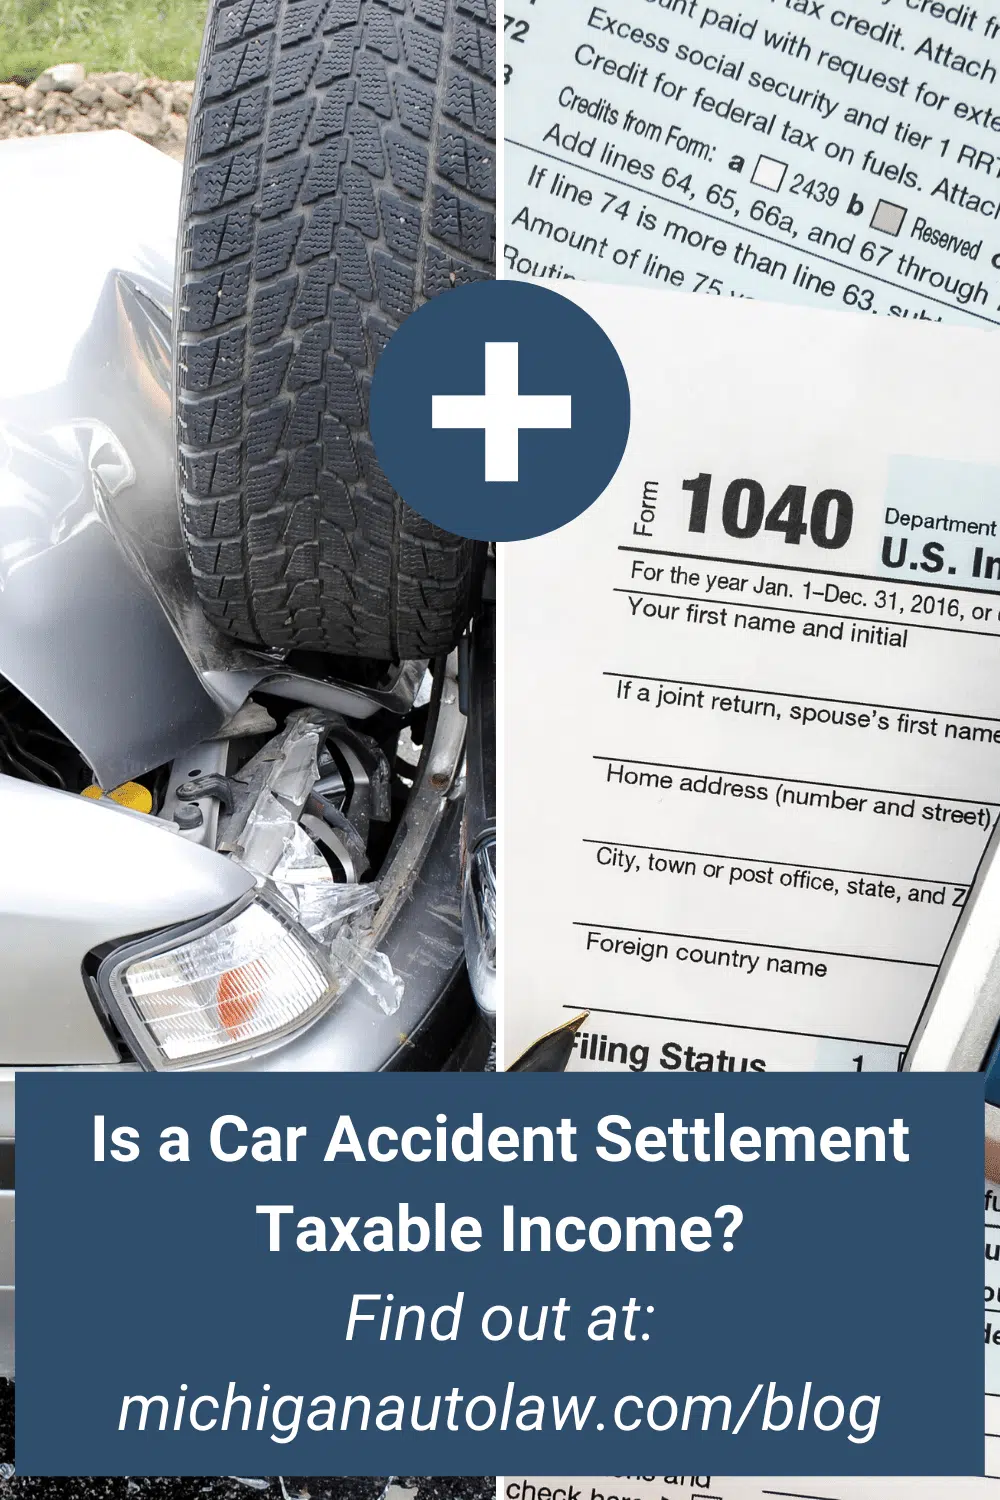 Is a Car Accident Settlement Taxable Income?